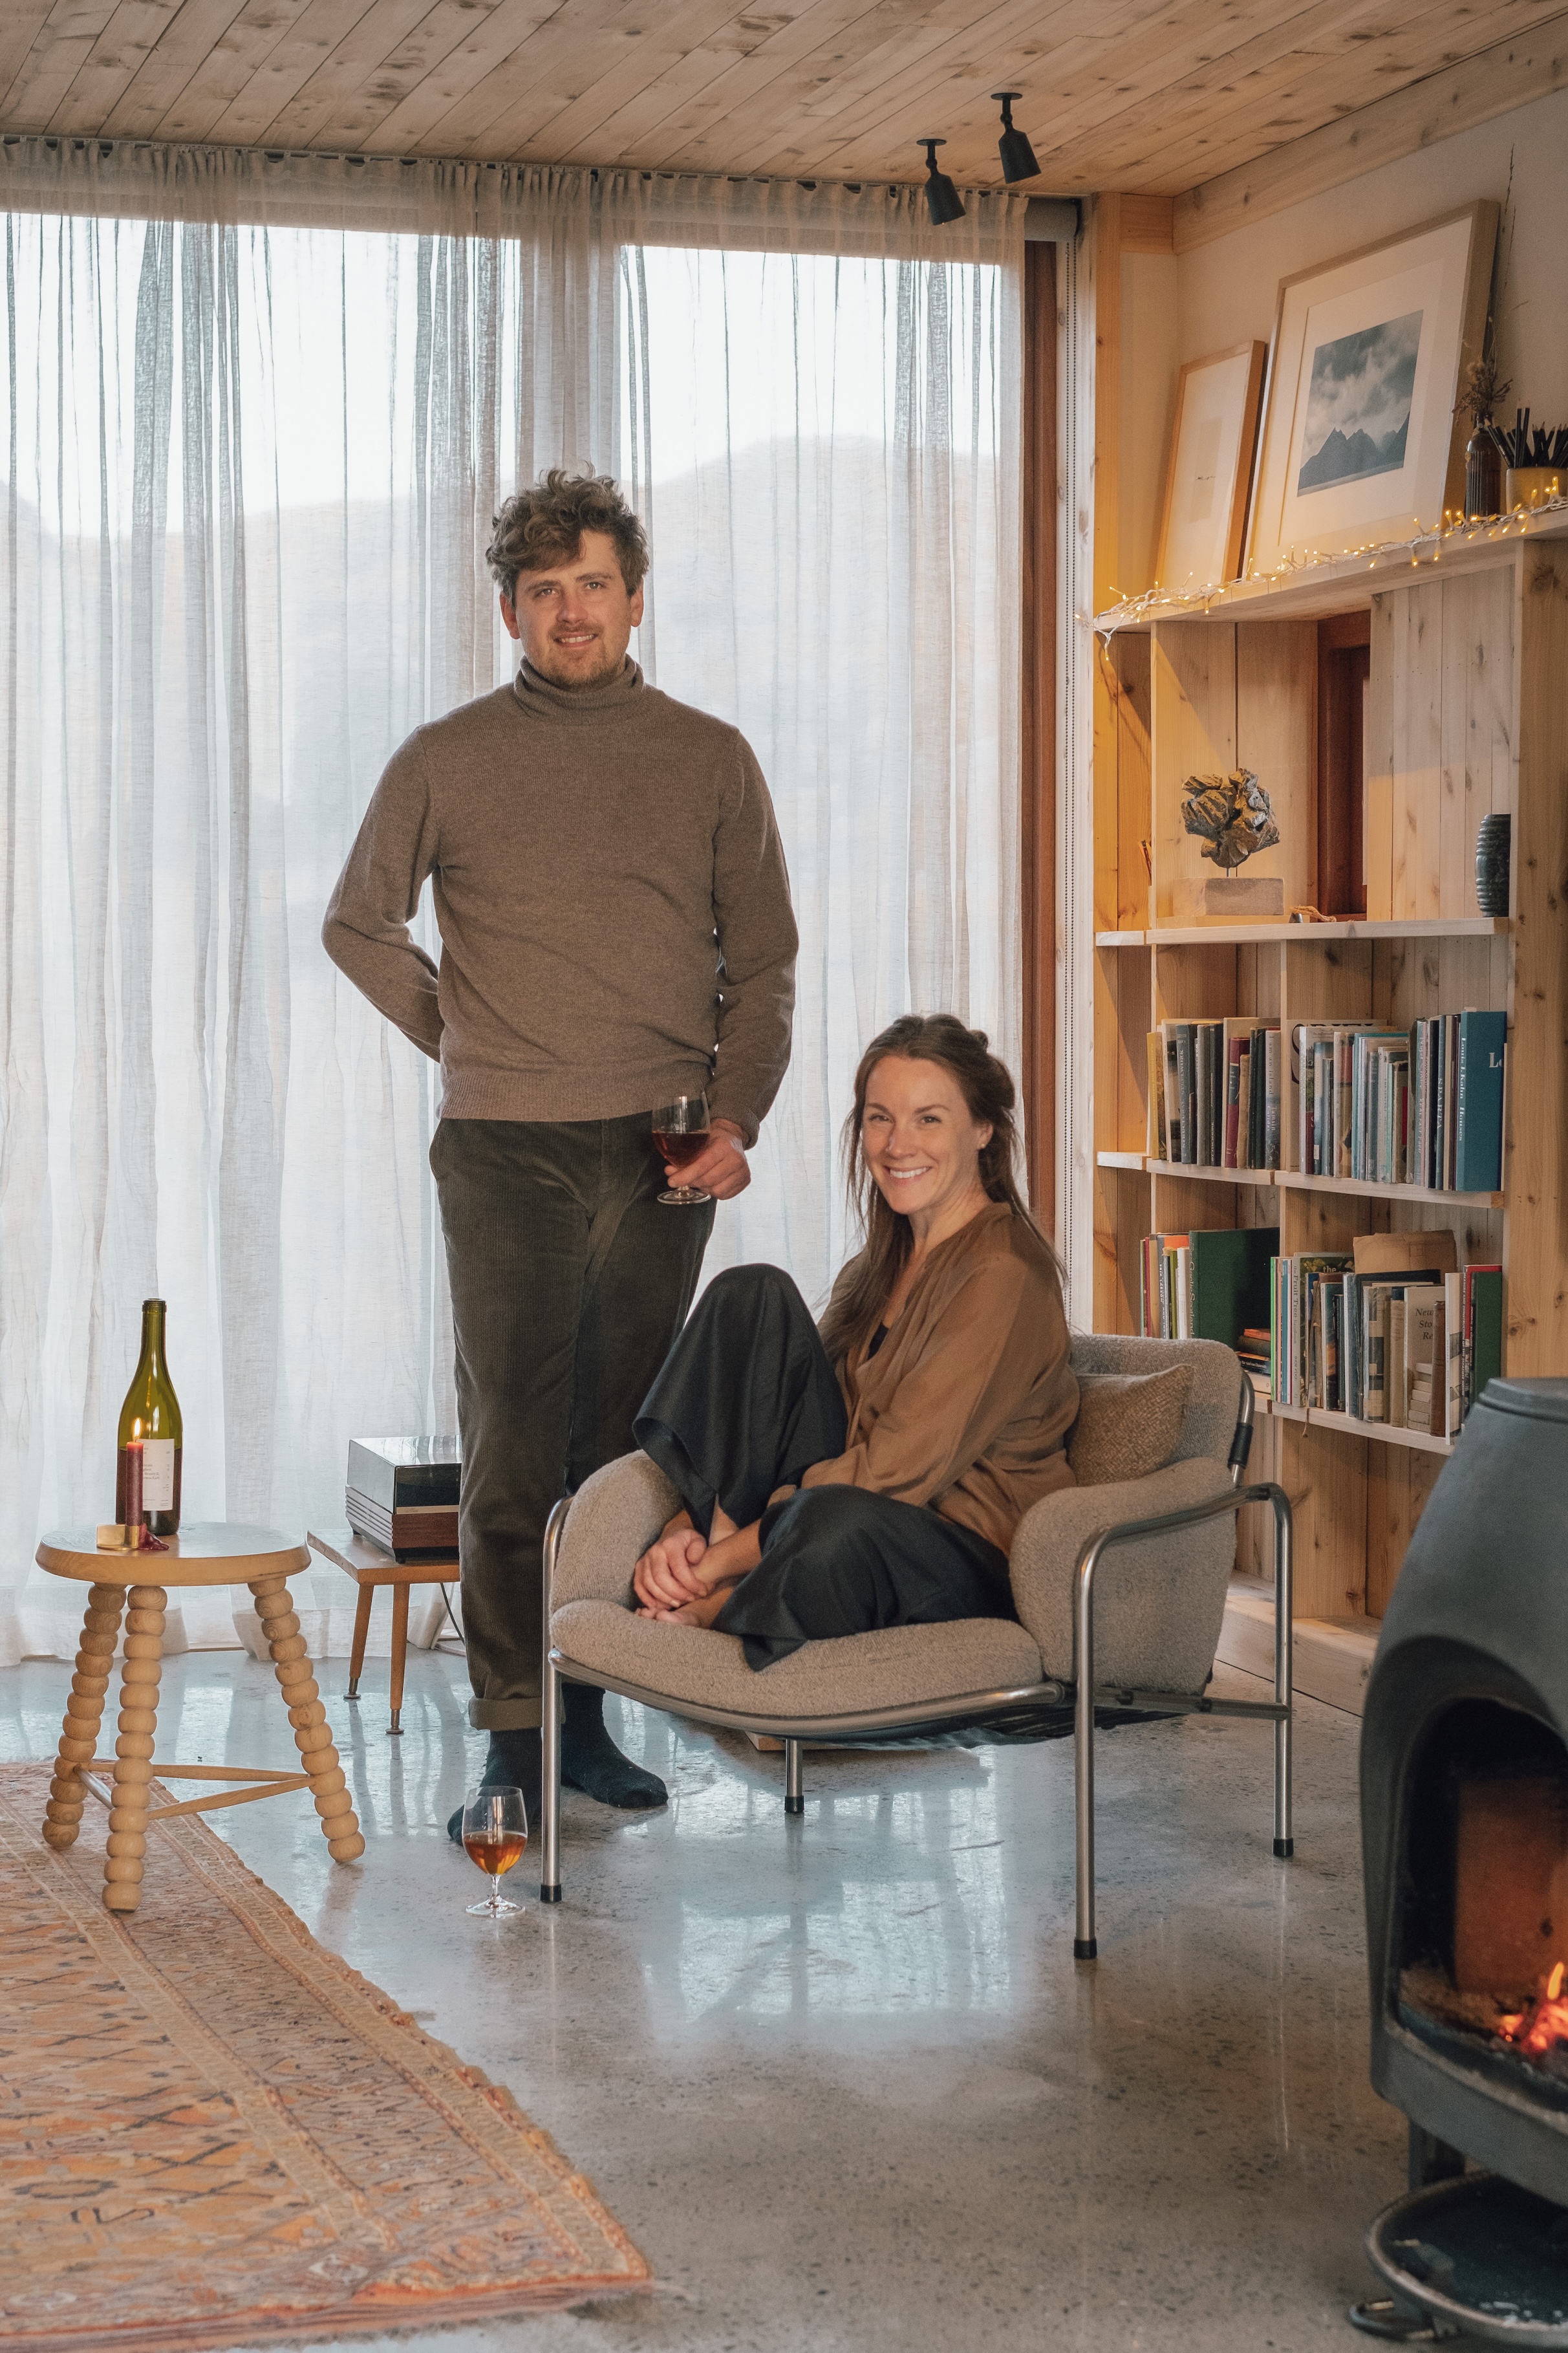 jack arudell and eilidh izat of izat arundell architecture at home in the outer 4